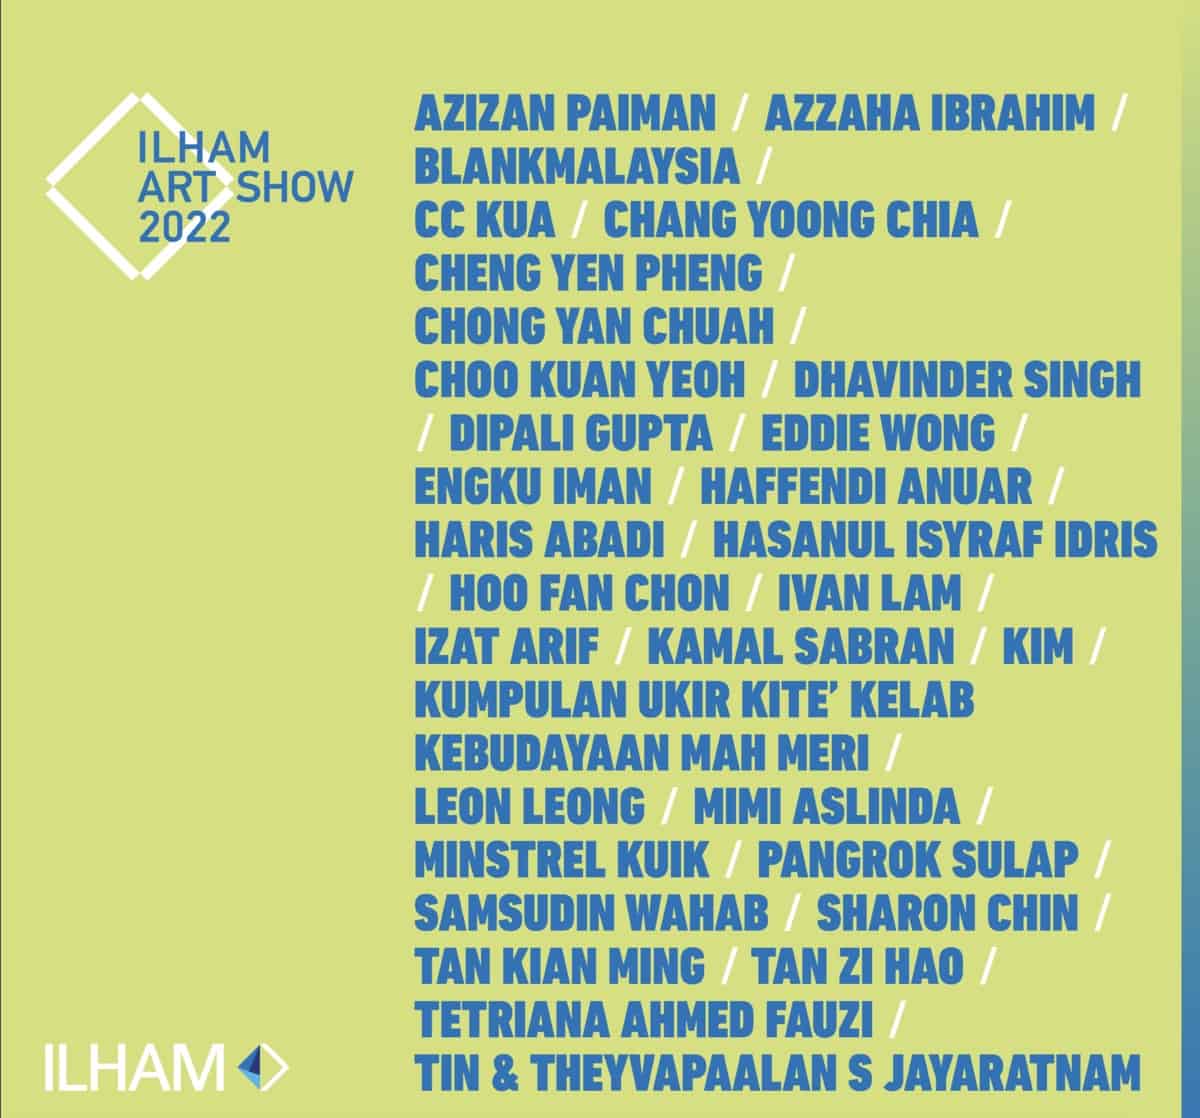 List of artists selected by the jury panel for the Ilham Art Show 2022.